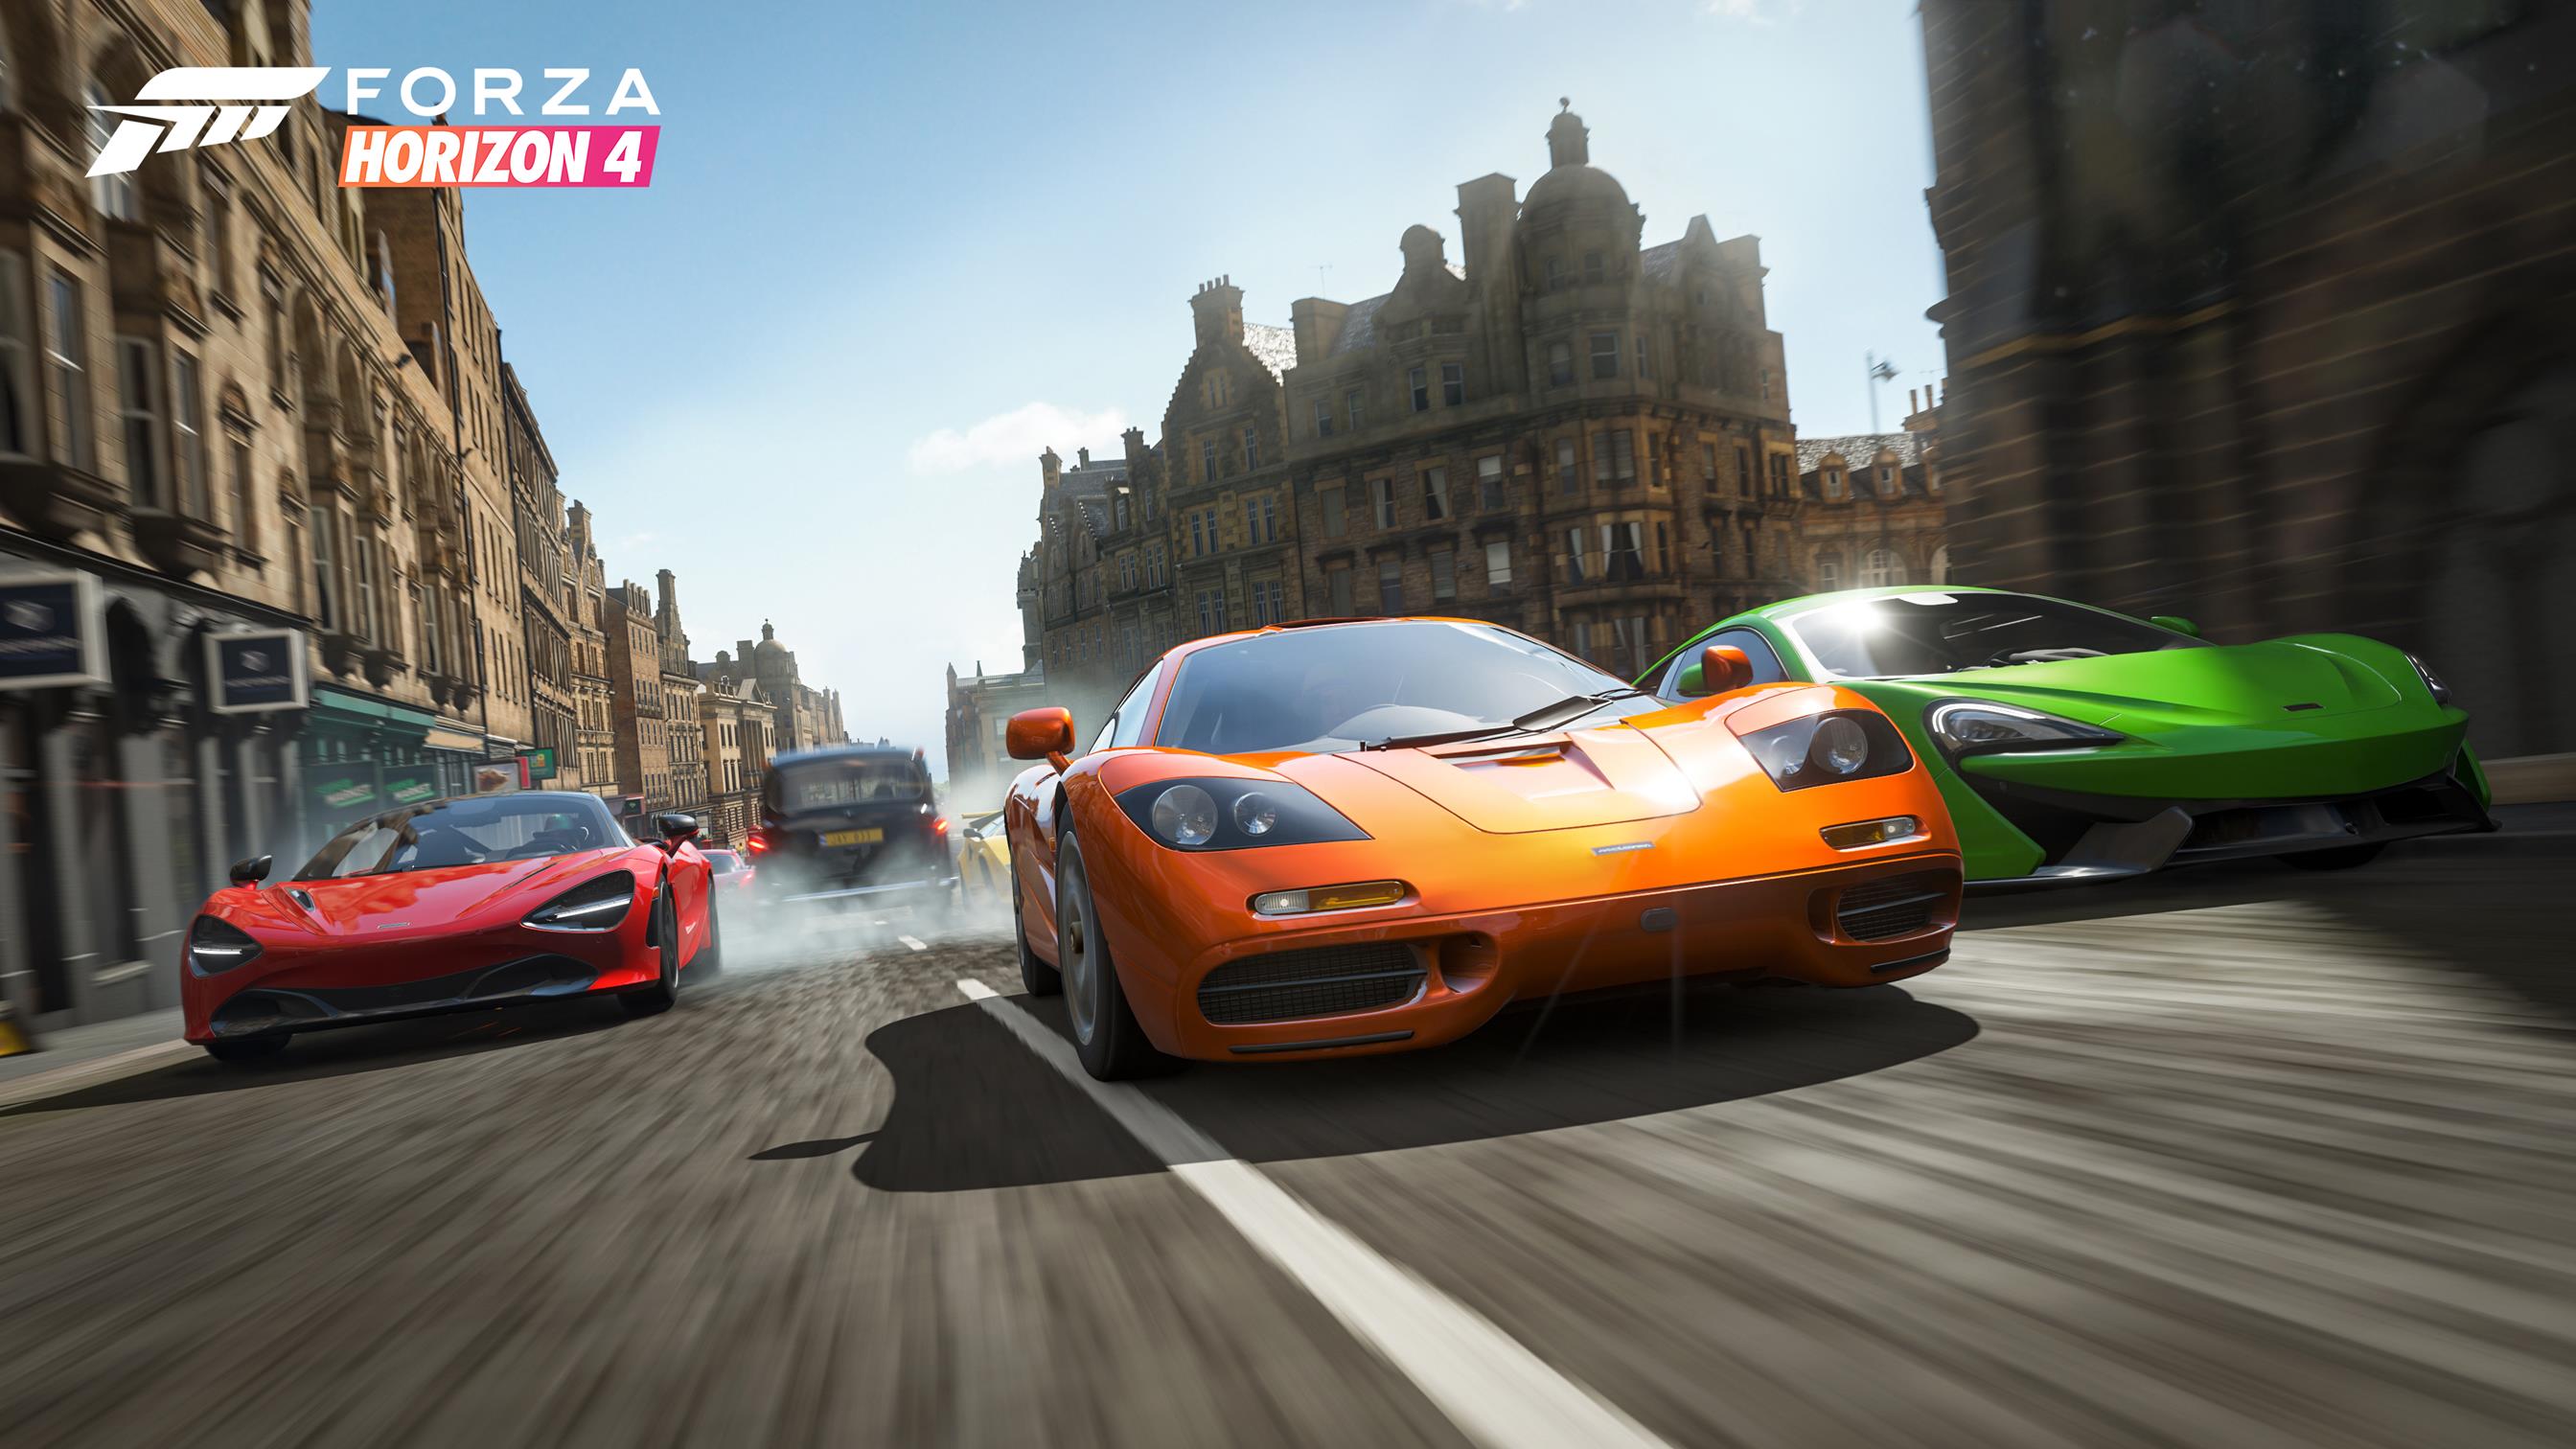 Image for Forza Horizon 4 will launch with HDR support on PC, recommended specs get you 60fps